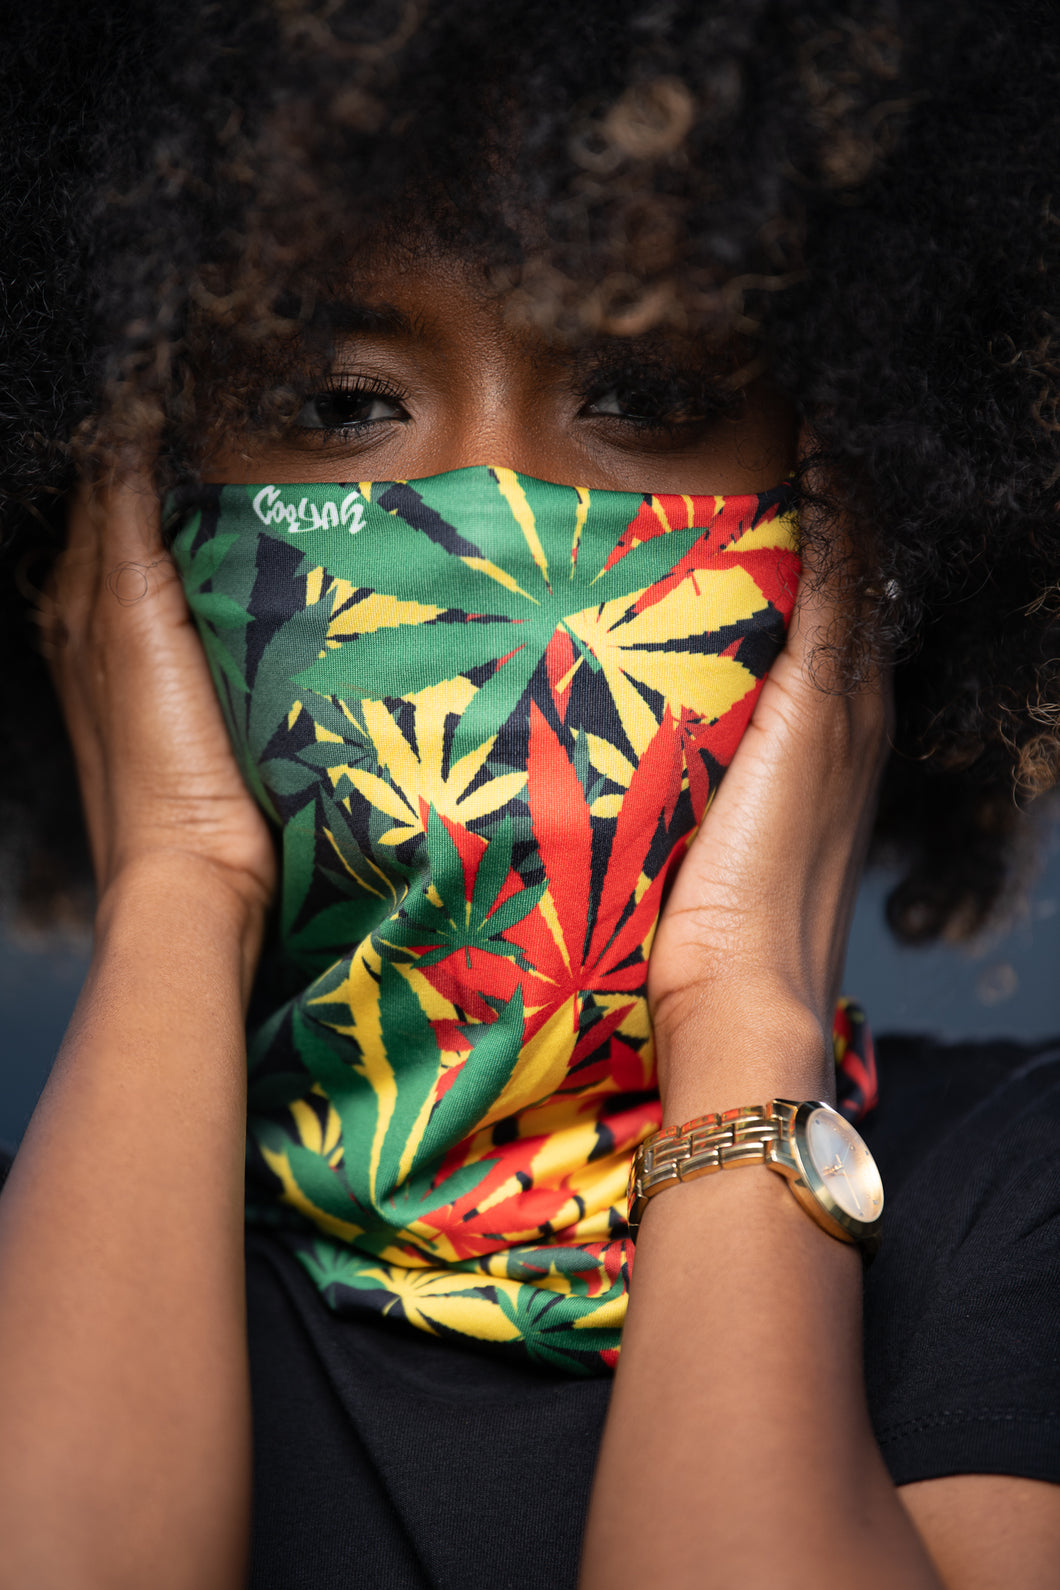 These Cooyah brand High Vibration gaiters are the perfect fit for outdoor activities.  They are multifunctional and can be worn as a scarf, headband, or mask to keep dust from your face.  Reggae Cannabis leaves design in rasta colors